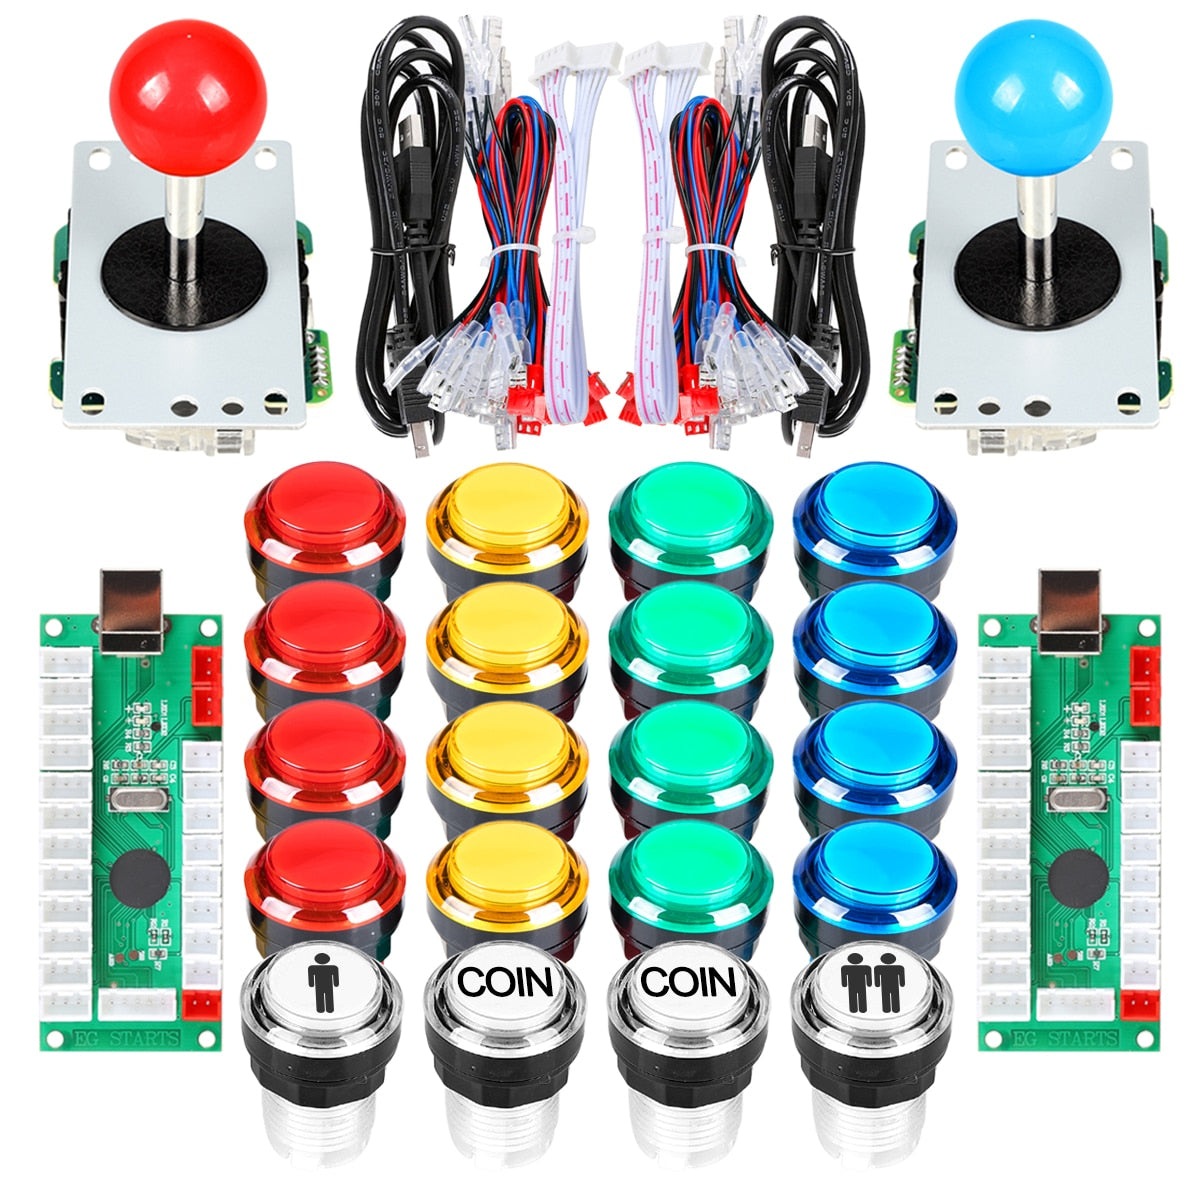 Avisiri 2 Player led Arcade Buttons and Joystick DIY kit 2X joysticks Red-Blue-Kits 20x led Arcade Buttons Game Controller kit for Windows and MAME and Raspberry Pi 